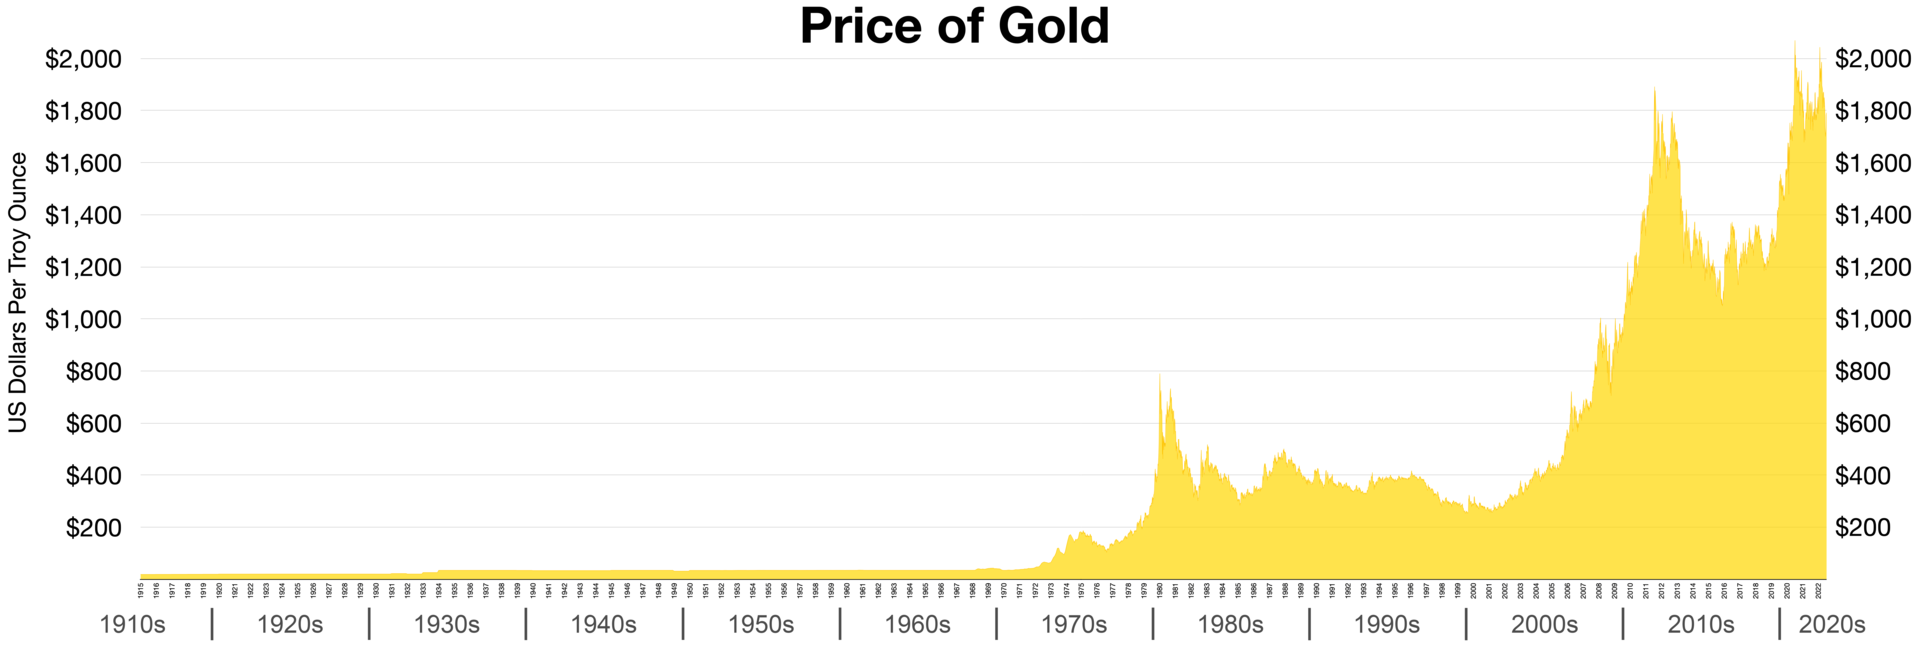 Price_of_gold